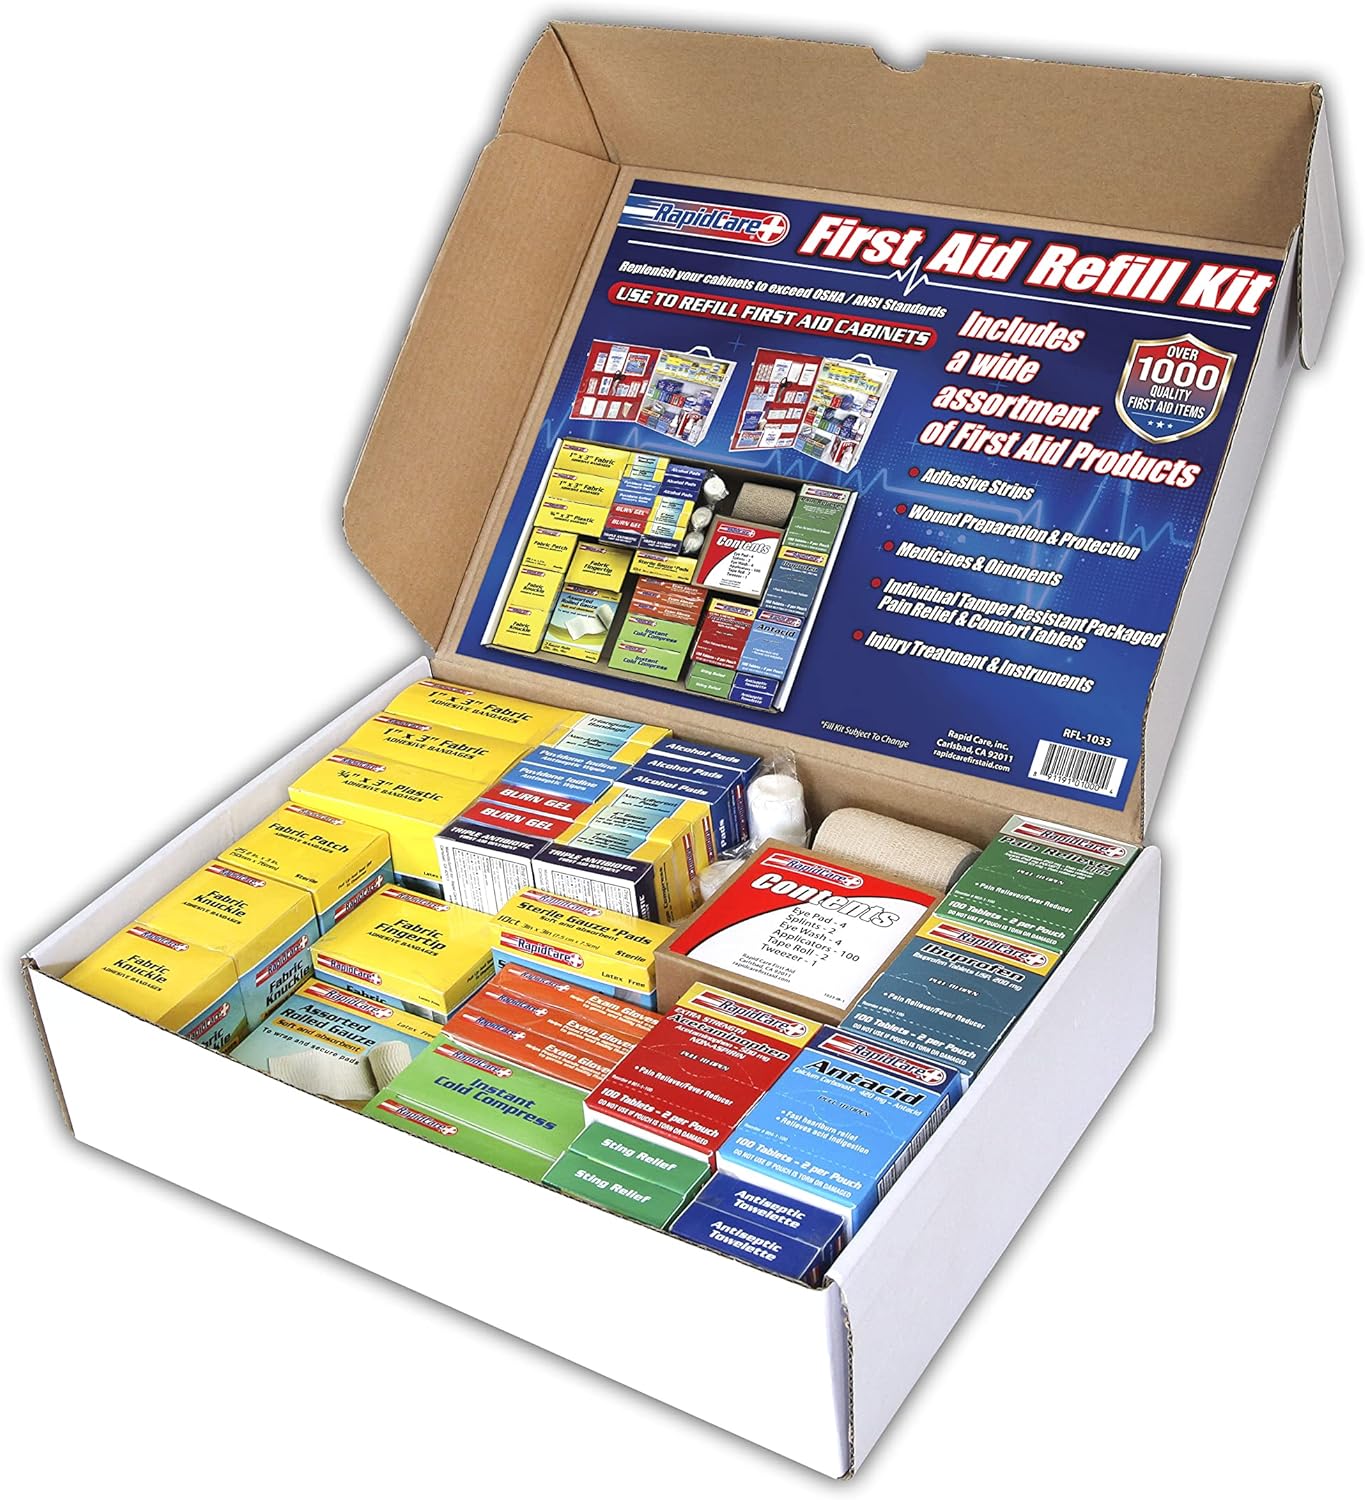 You Just Need a Refill! First Aid Refill Kit